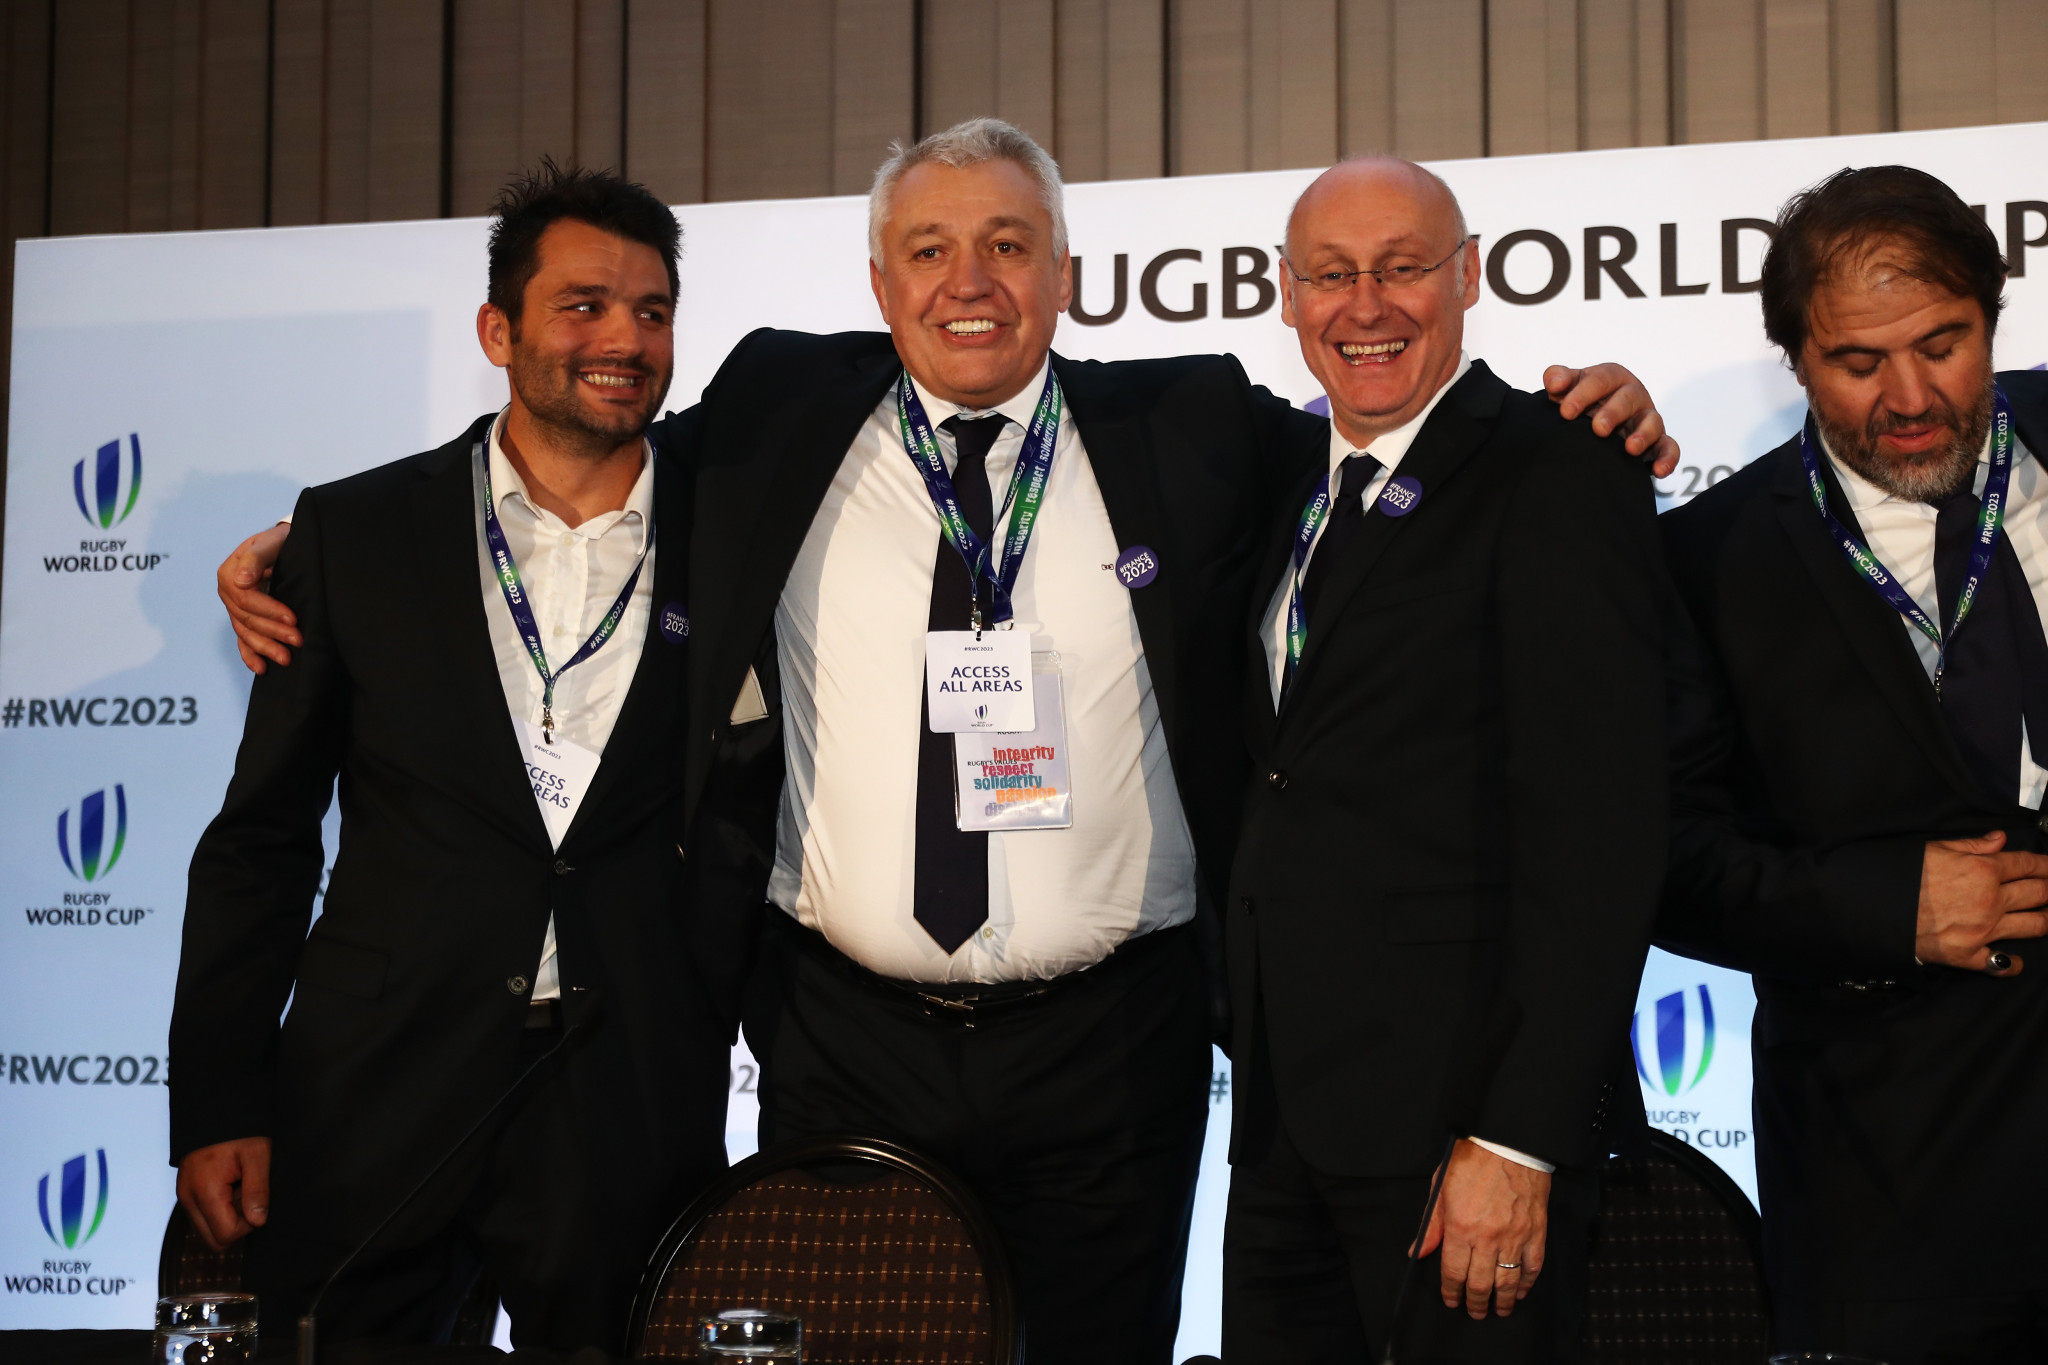 France will host the 2023 Rugby World Cup ©World Rugby